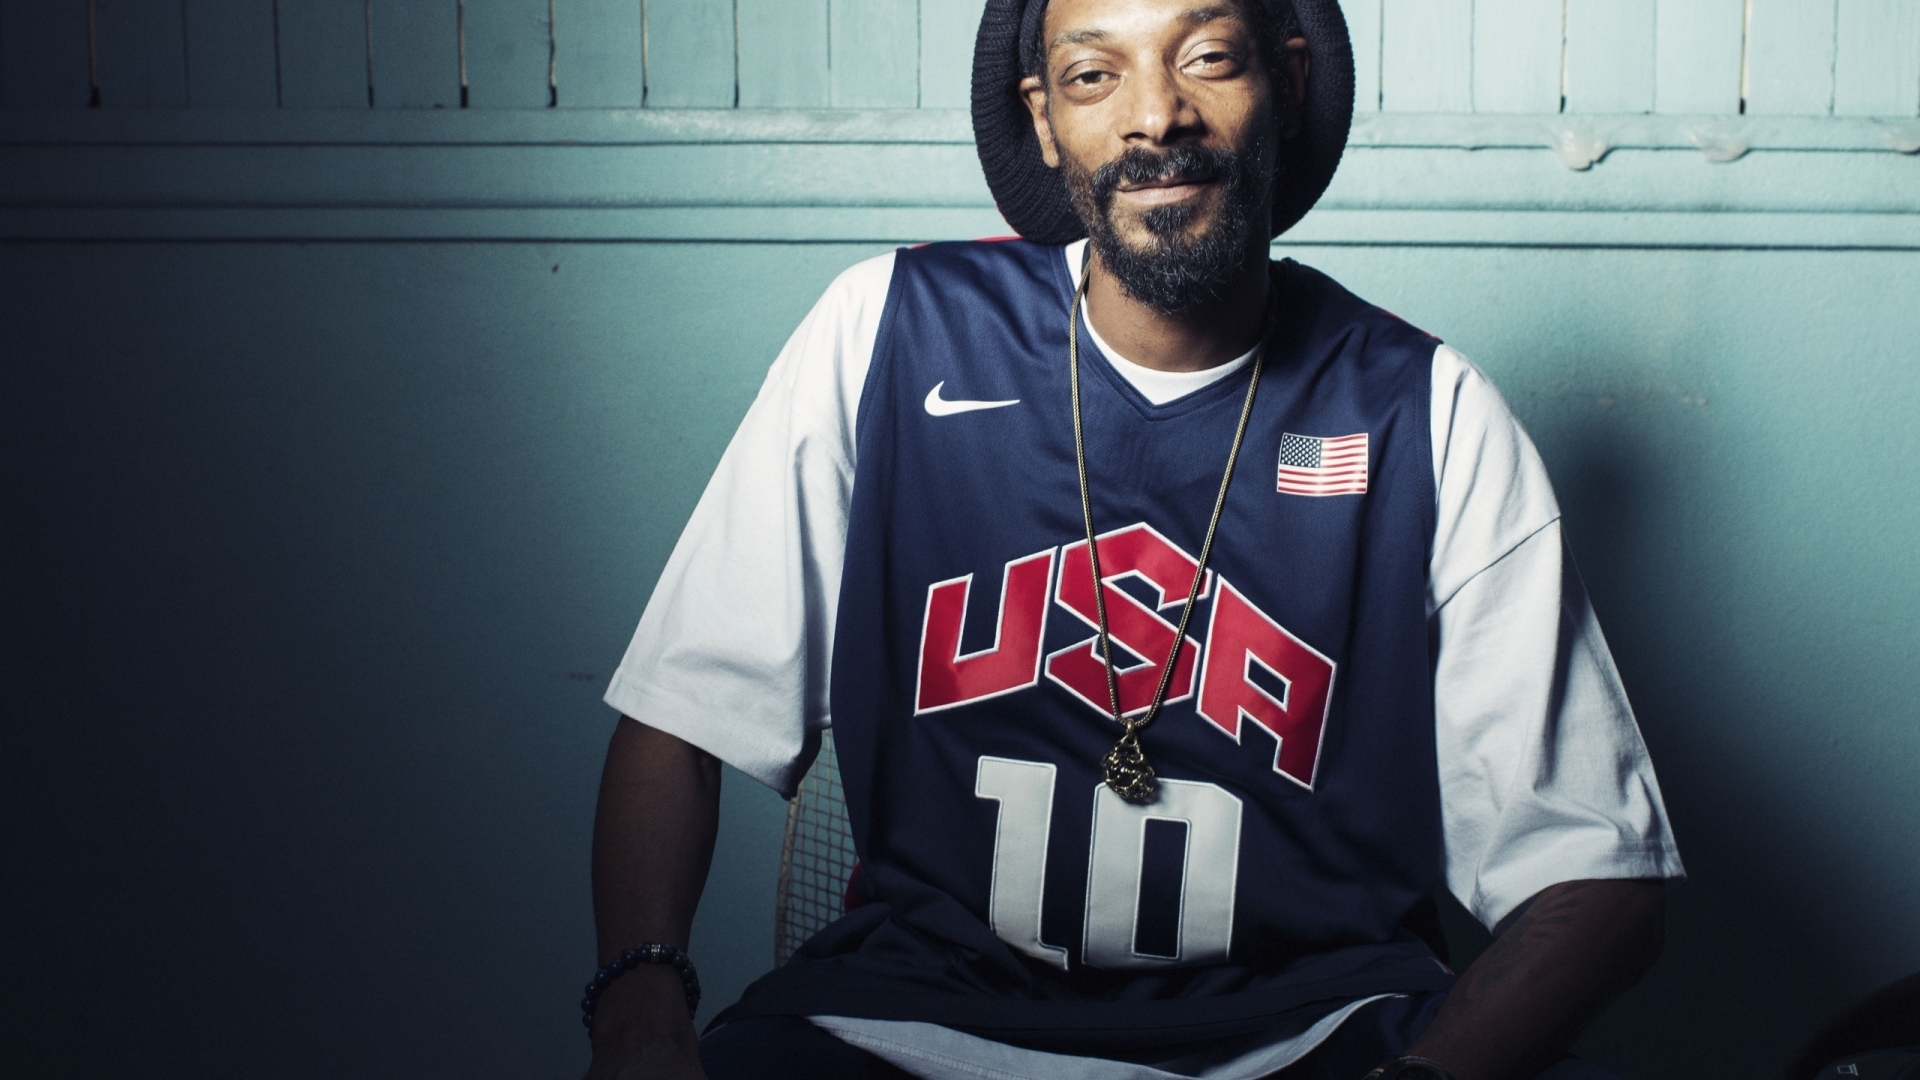 Snoop Dog Jersey for 1920 x 1080 HDTV 1080p resolution